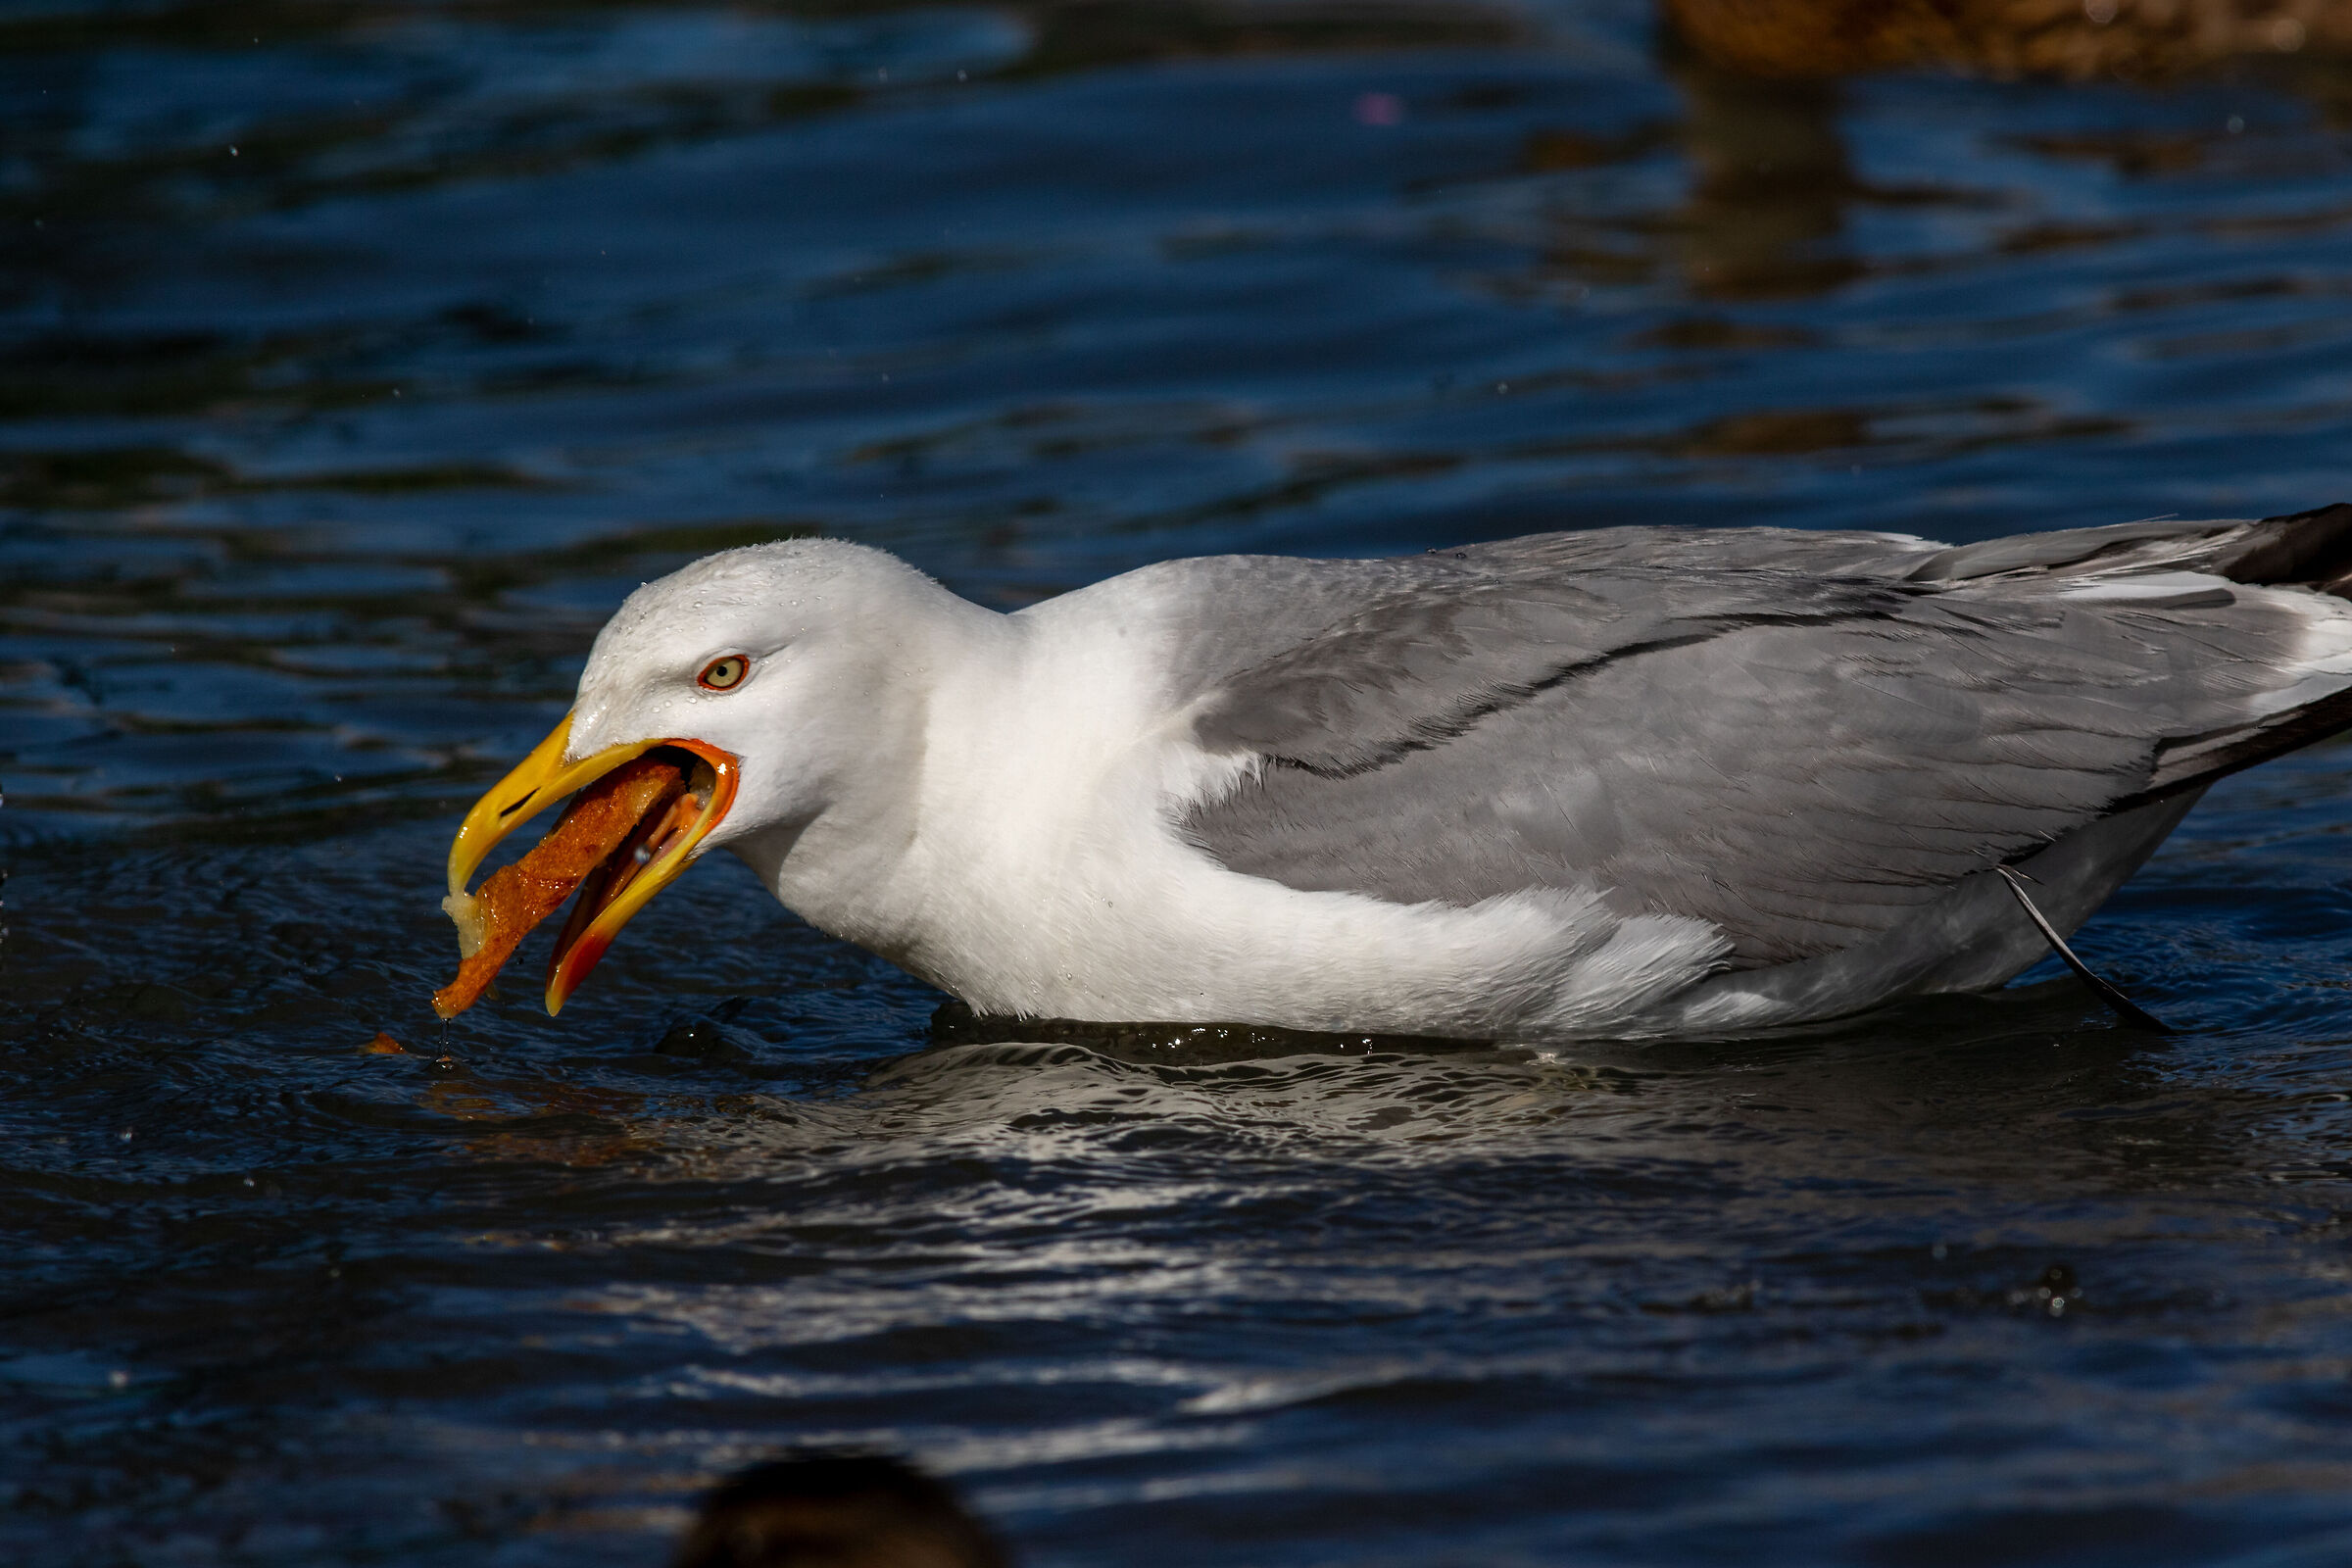 The seagull in love (with his piece of bread)...